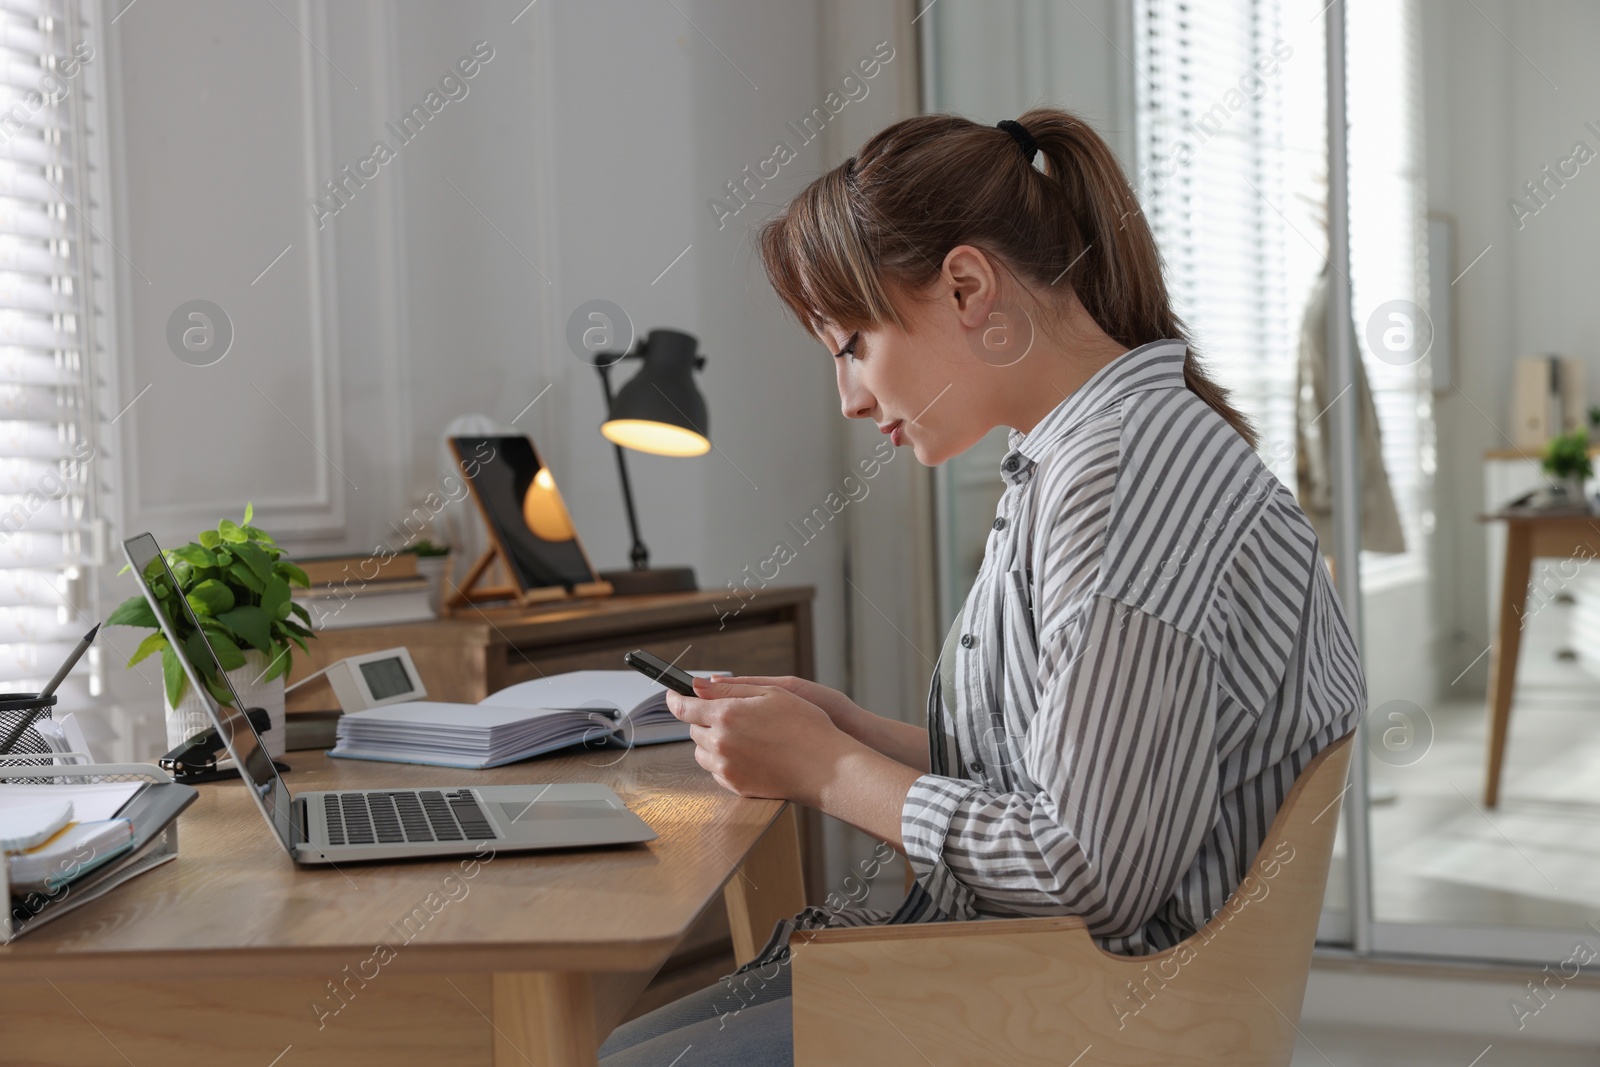 Photo of Young woman with poor posture using smartphone at table indoors